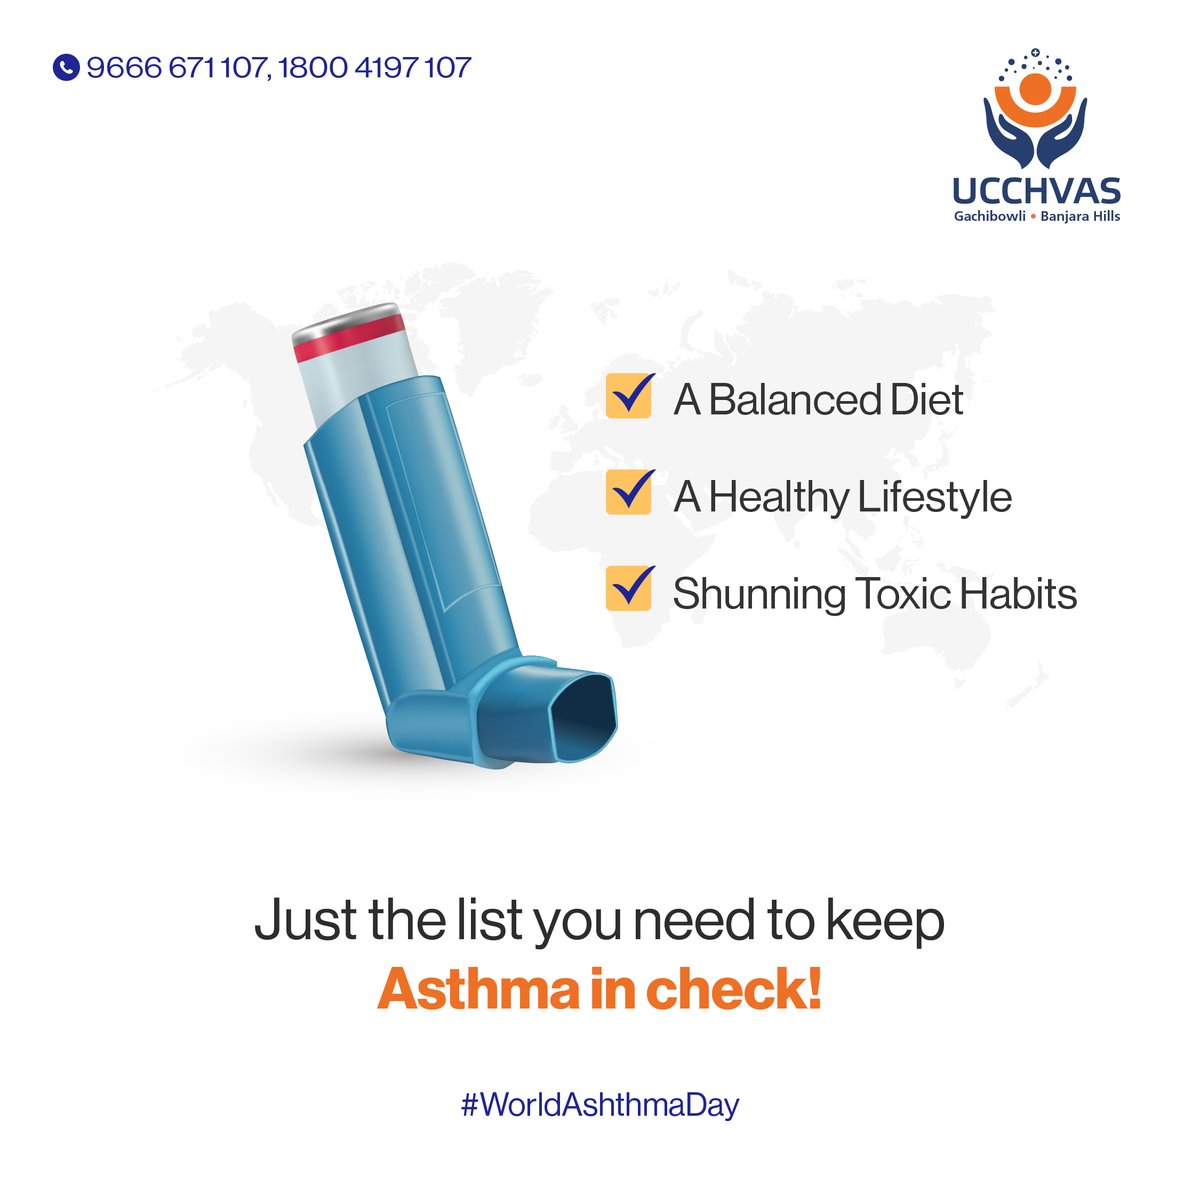 Sending strength to everyone living with asthma today, and every single day on #WorldAsthmaDay
Here's to maintaining a healthy life routine that helps us combat this inconveniencing condition.
For now, you're not alone!
#WorldAsthmaDay #Ucchvas #TransitionalCare #Rehabilitation